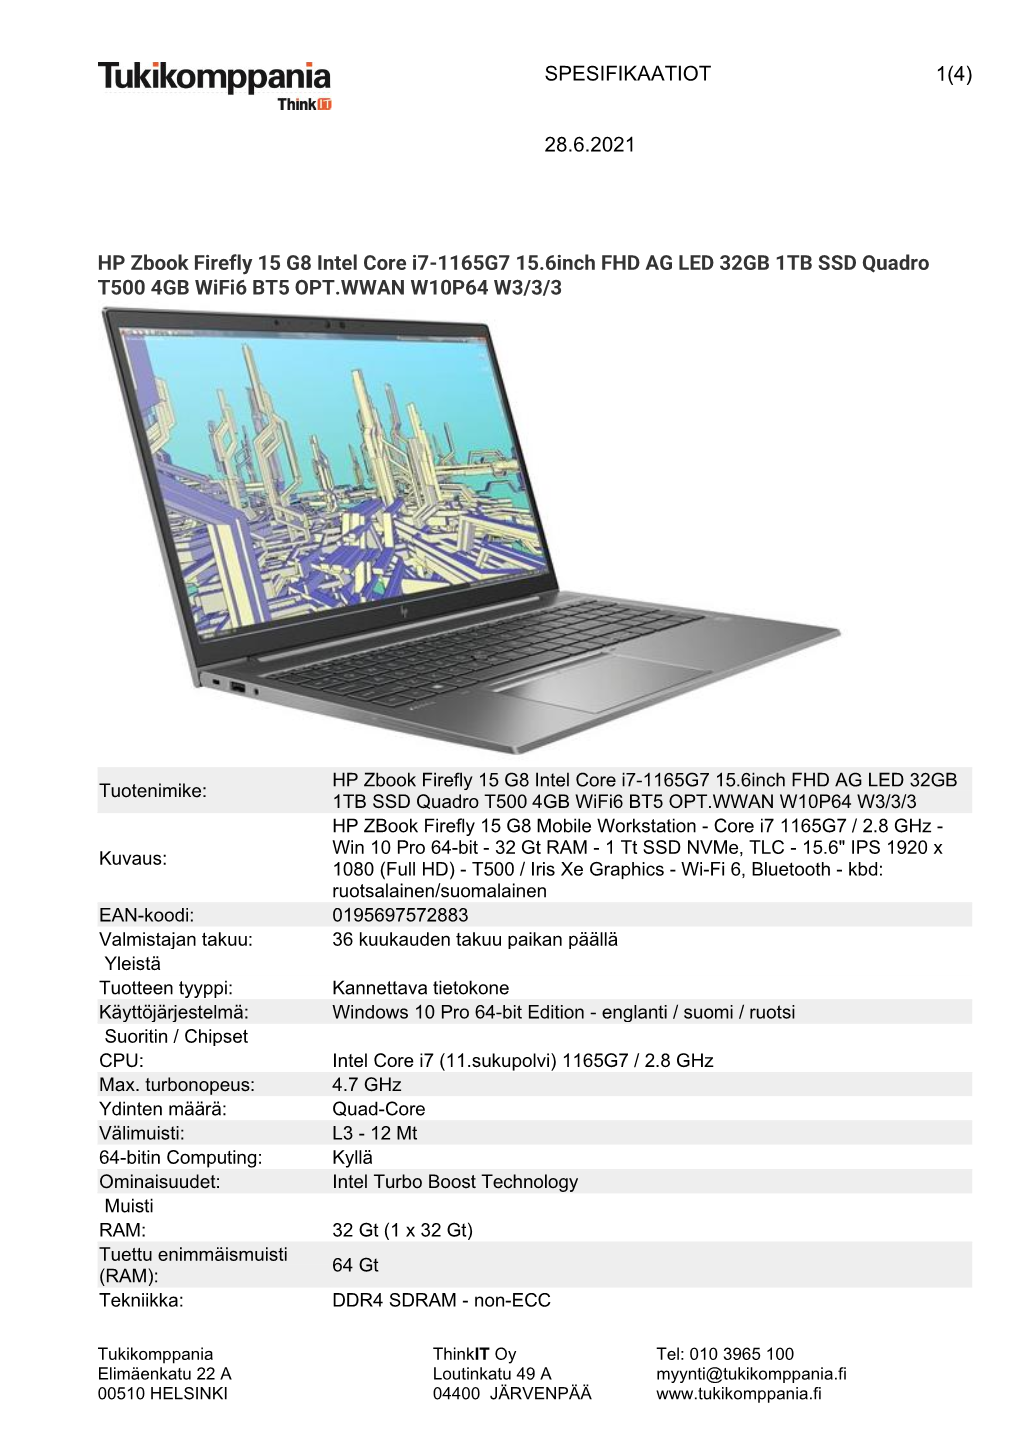 HP Zbook Firefly 15 G8 Intel Core I7-1165G7 15.6Inch FHD AG LED 32GB 1TB SSD Quadro T500 4GB Wifi6 BT5 OPT.WWAN W10P64 W3/3/3